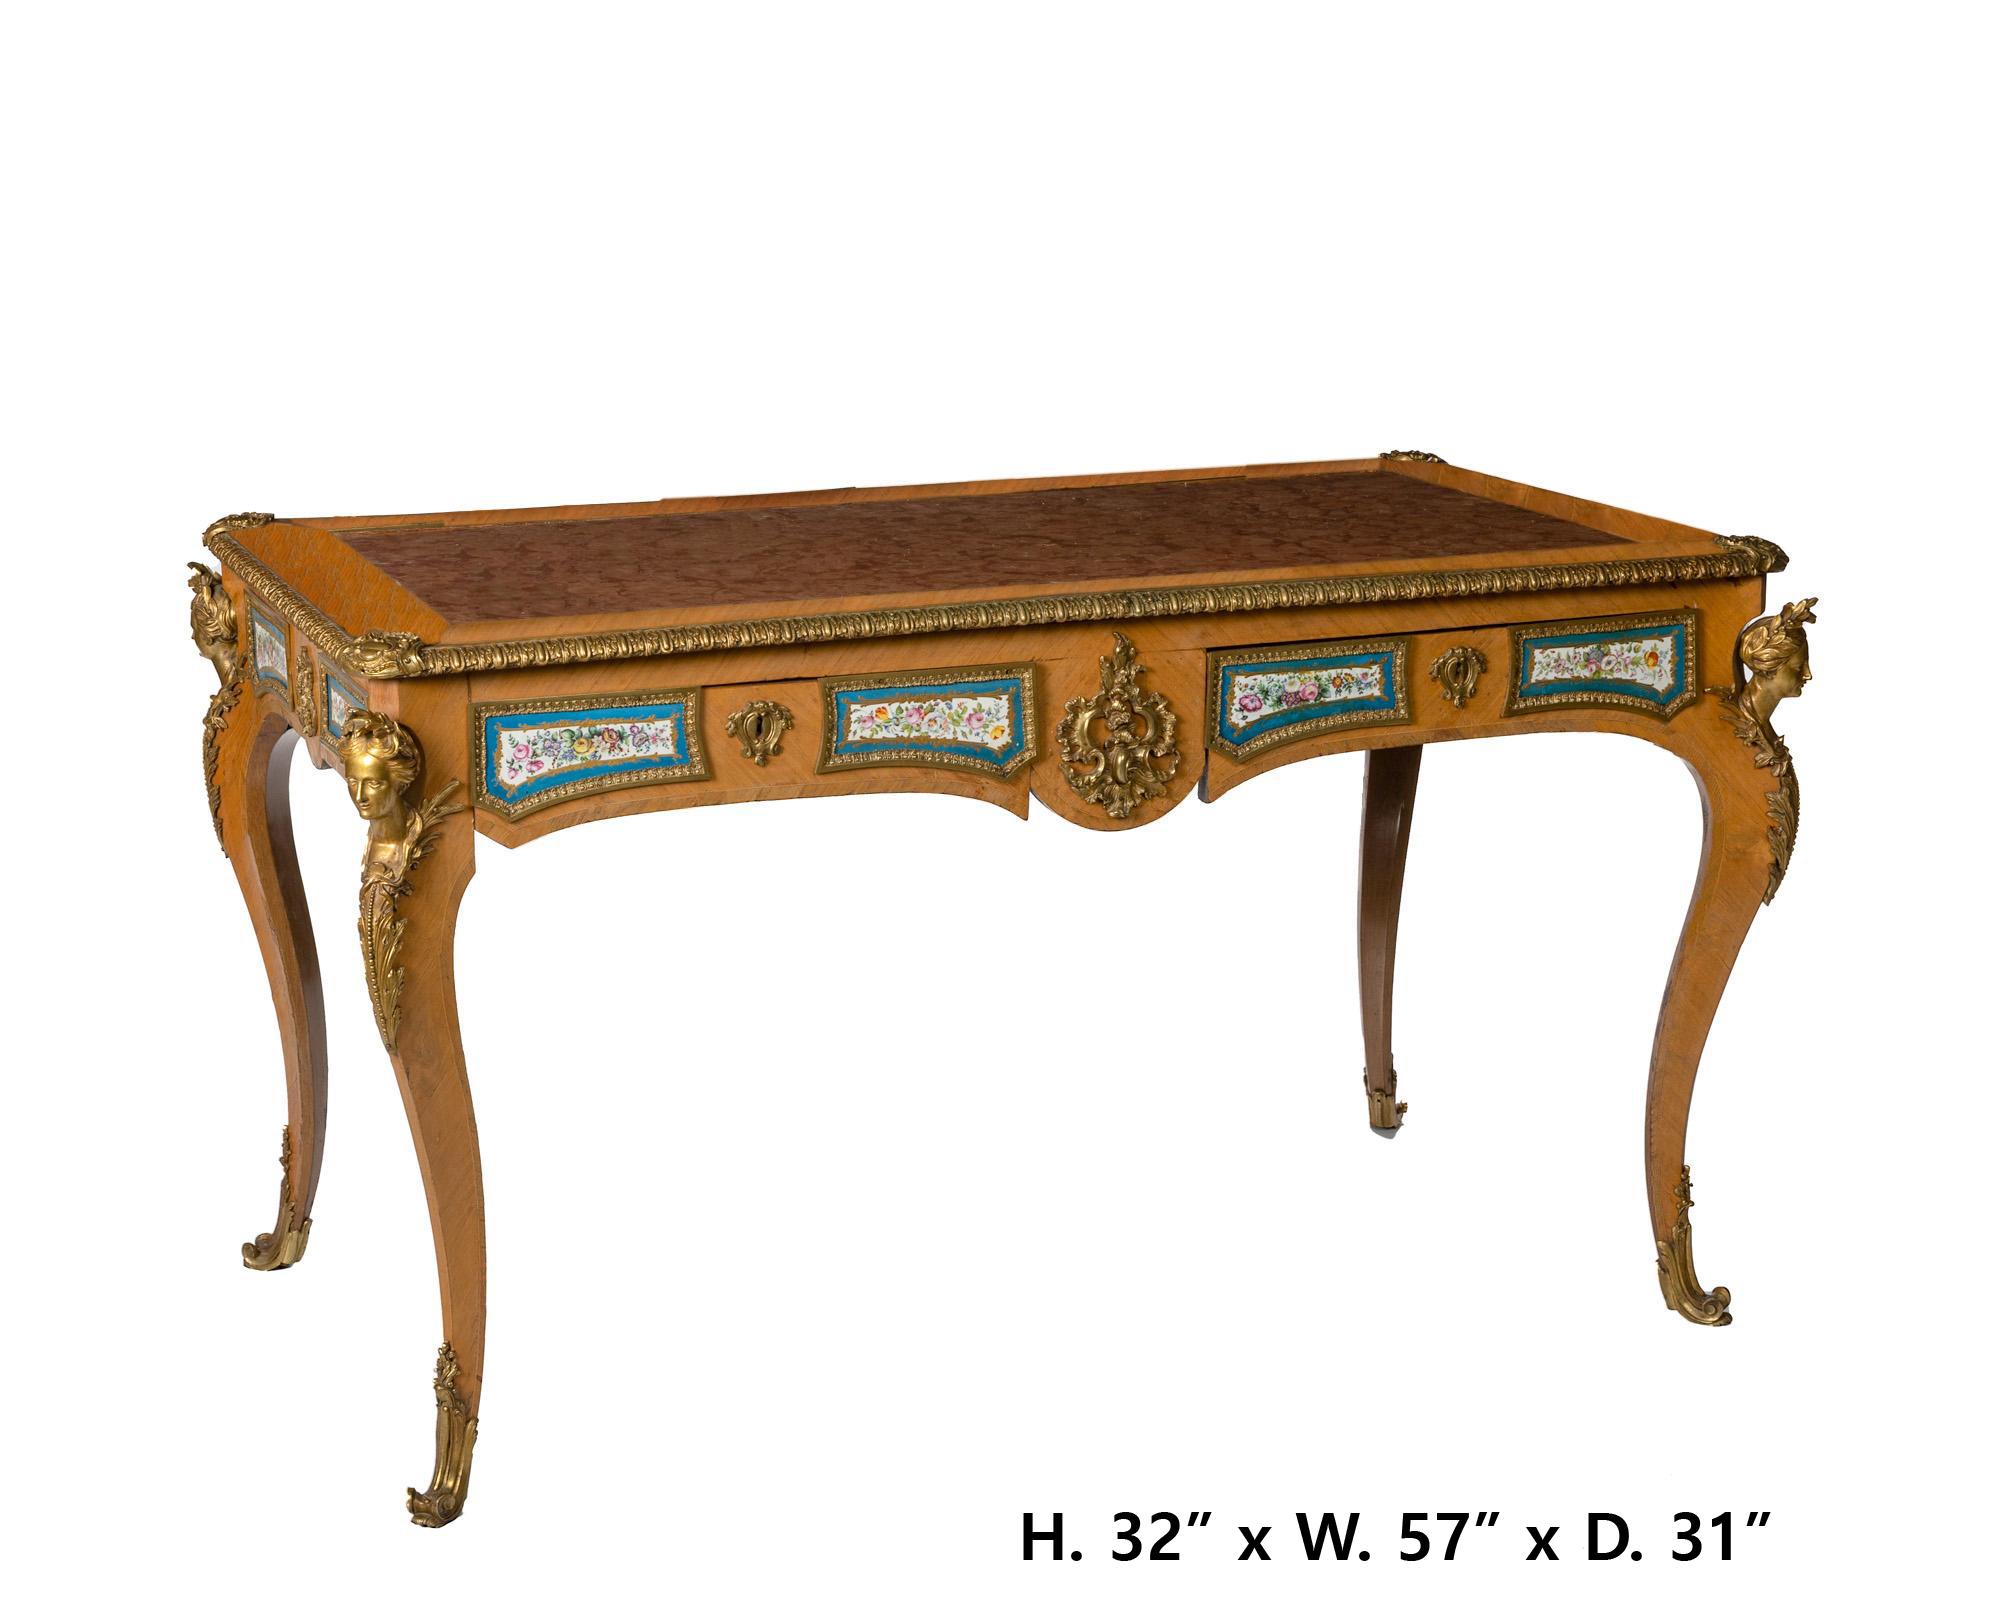 Late 19 century French Louis XV stylekingwood veneered bureau plat with inset marble top over a gilt-bronze mounted apron with inset Sevres porcelain plaques and two frieze drawers raised on four cabriole legs with figural masks and sabots to the